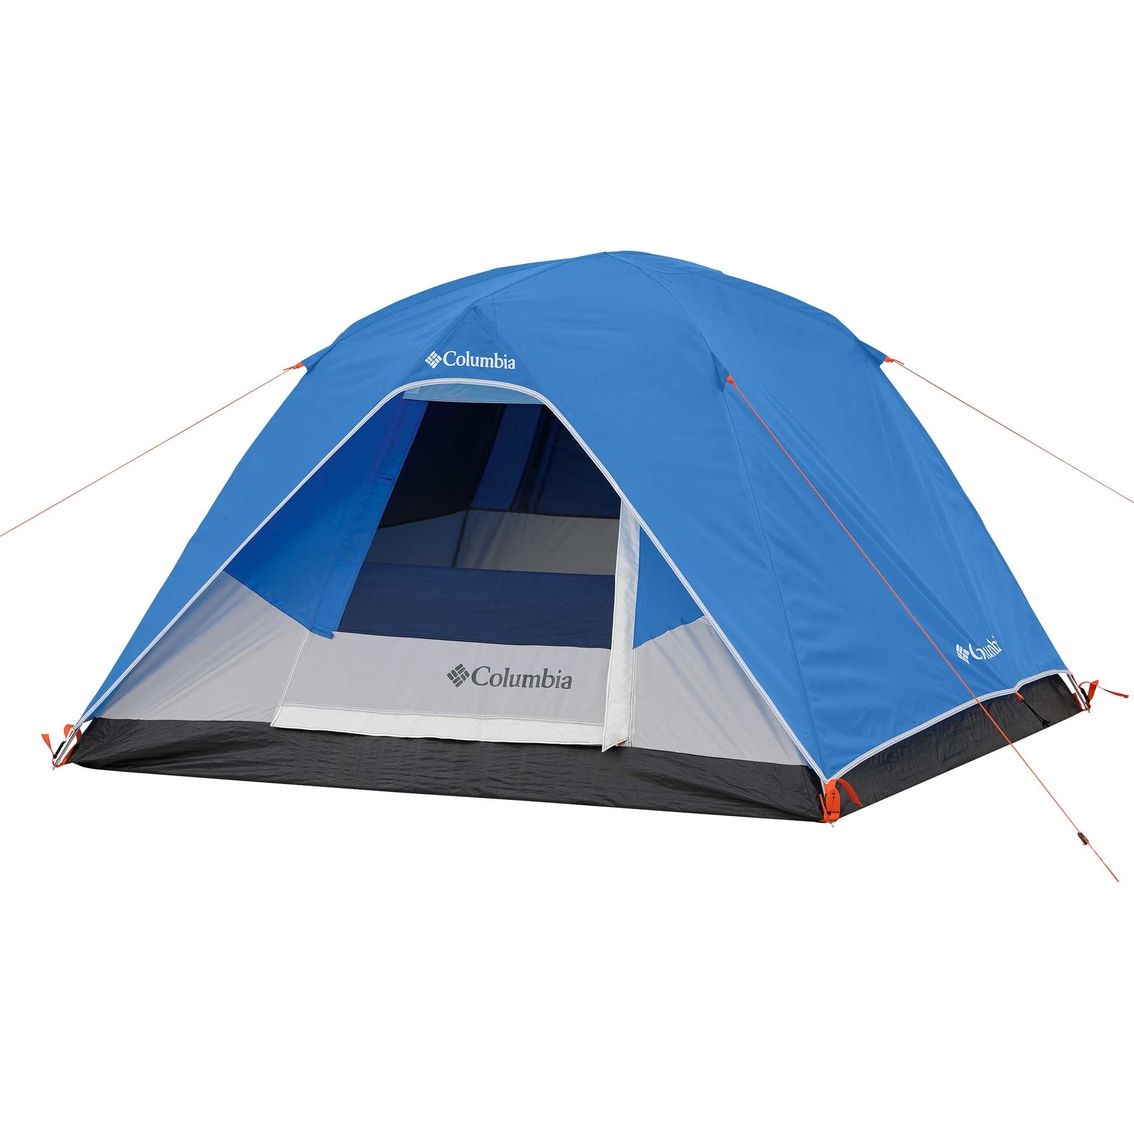 Columbia 3 Person FRP Tent - Image 1 of 10